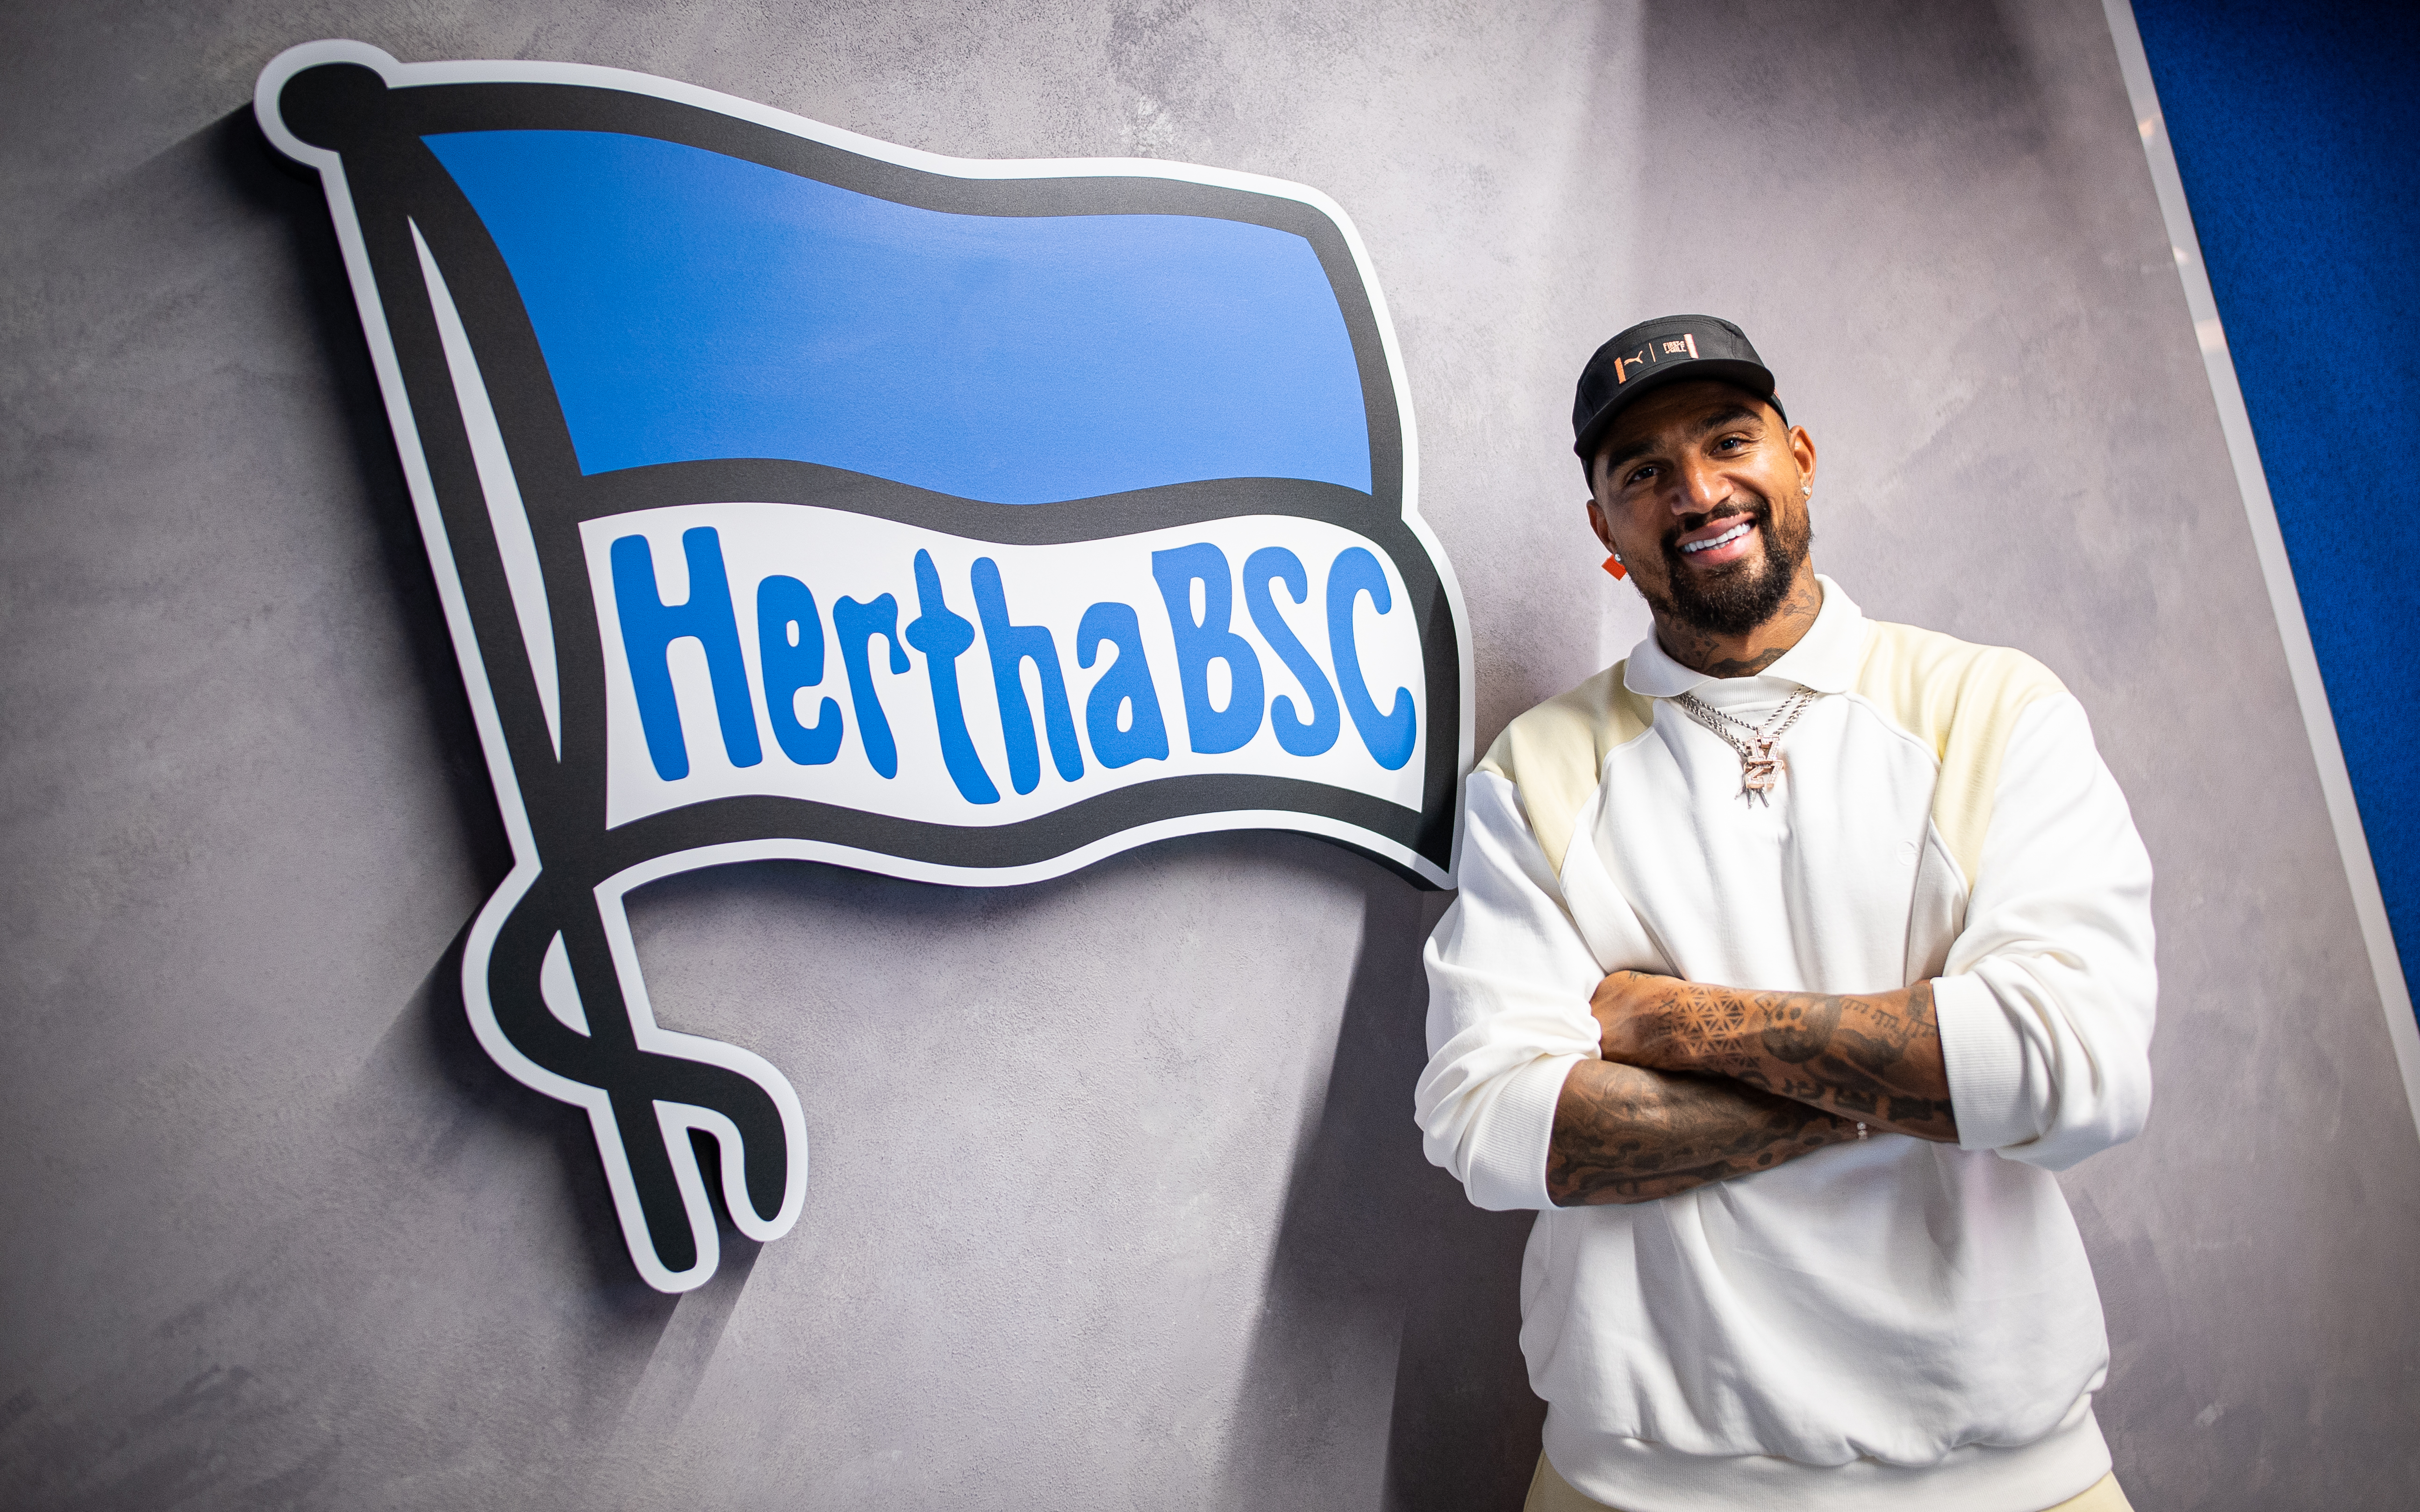 Kevin-Prince Boateng next to the Hertha BSC badge.